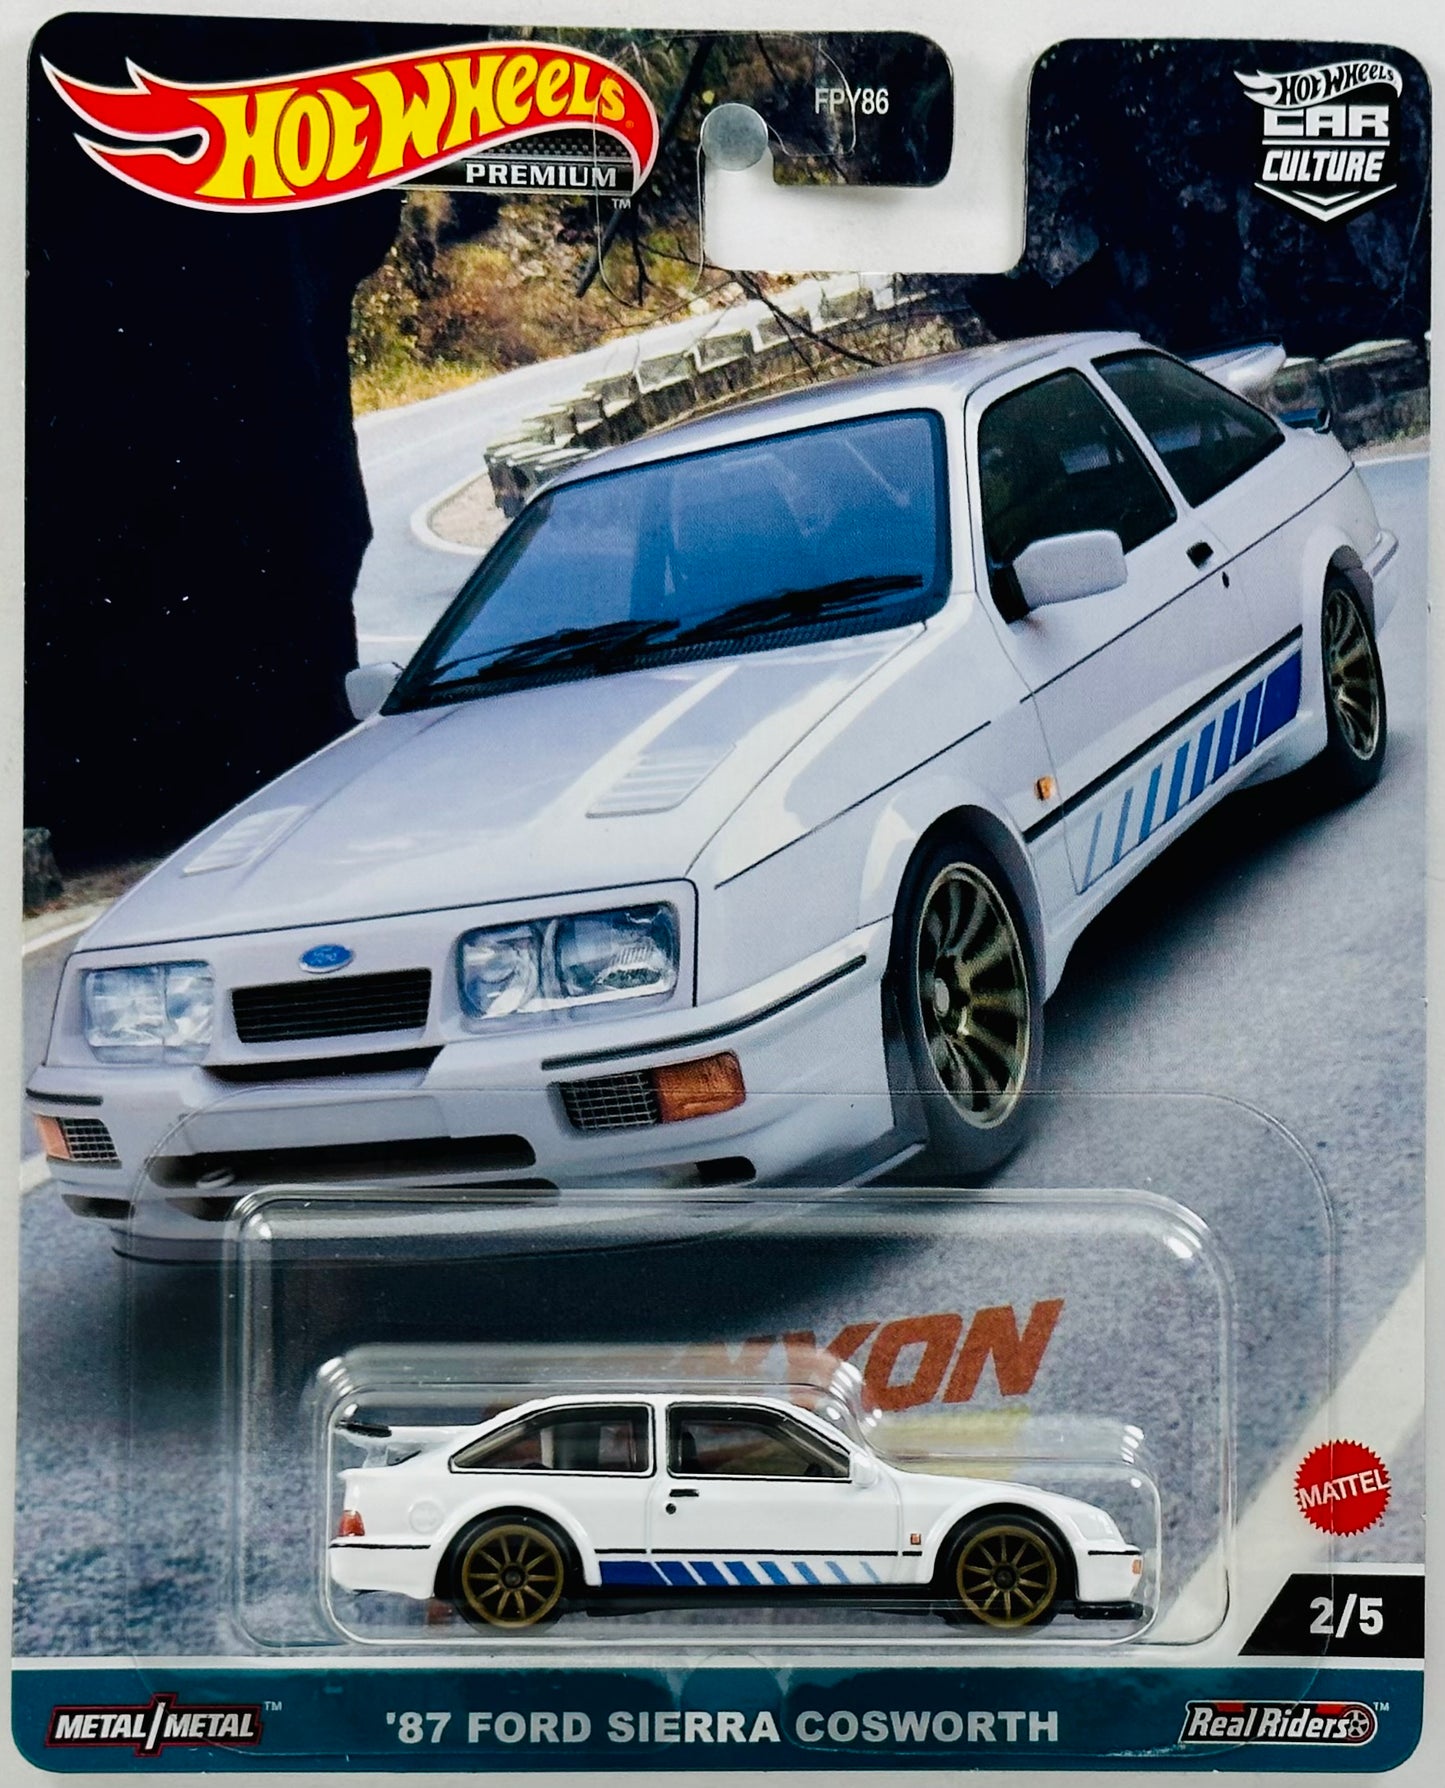 Hot Wheels 2023 - Premium / Car Culture - Canyon Warriors 02/05 - '87 Ford Sierra Cosworth - White - Metal/Metal & Real Riders